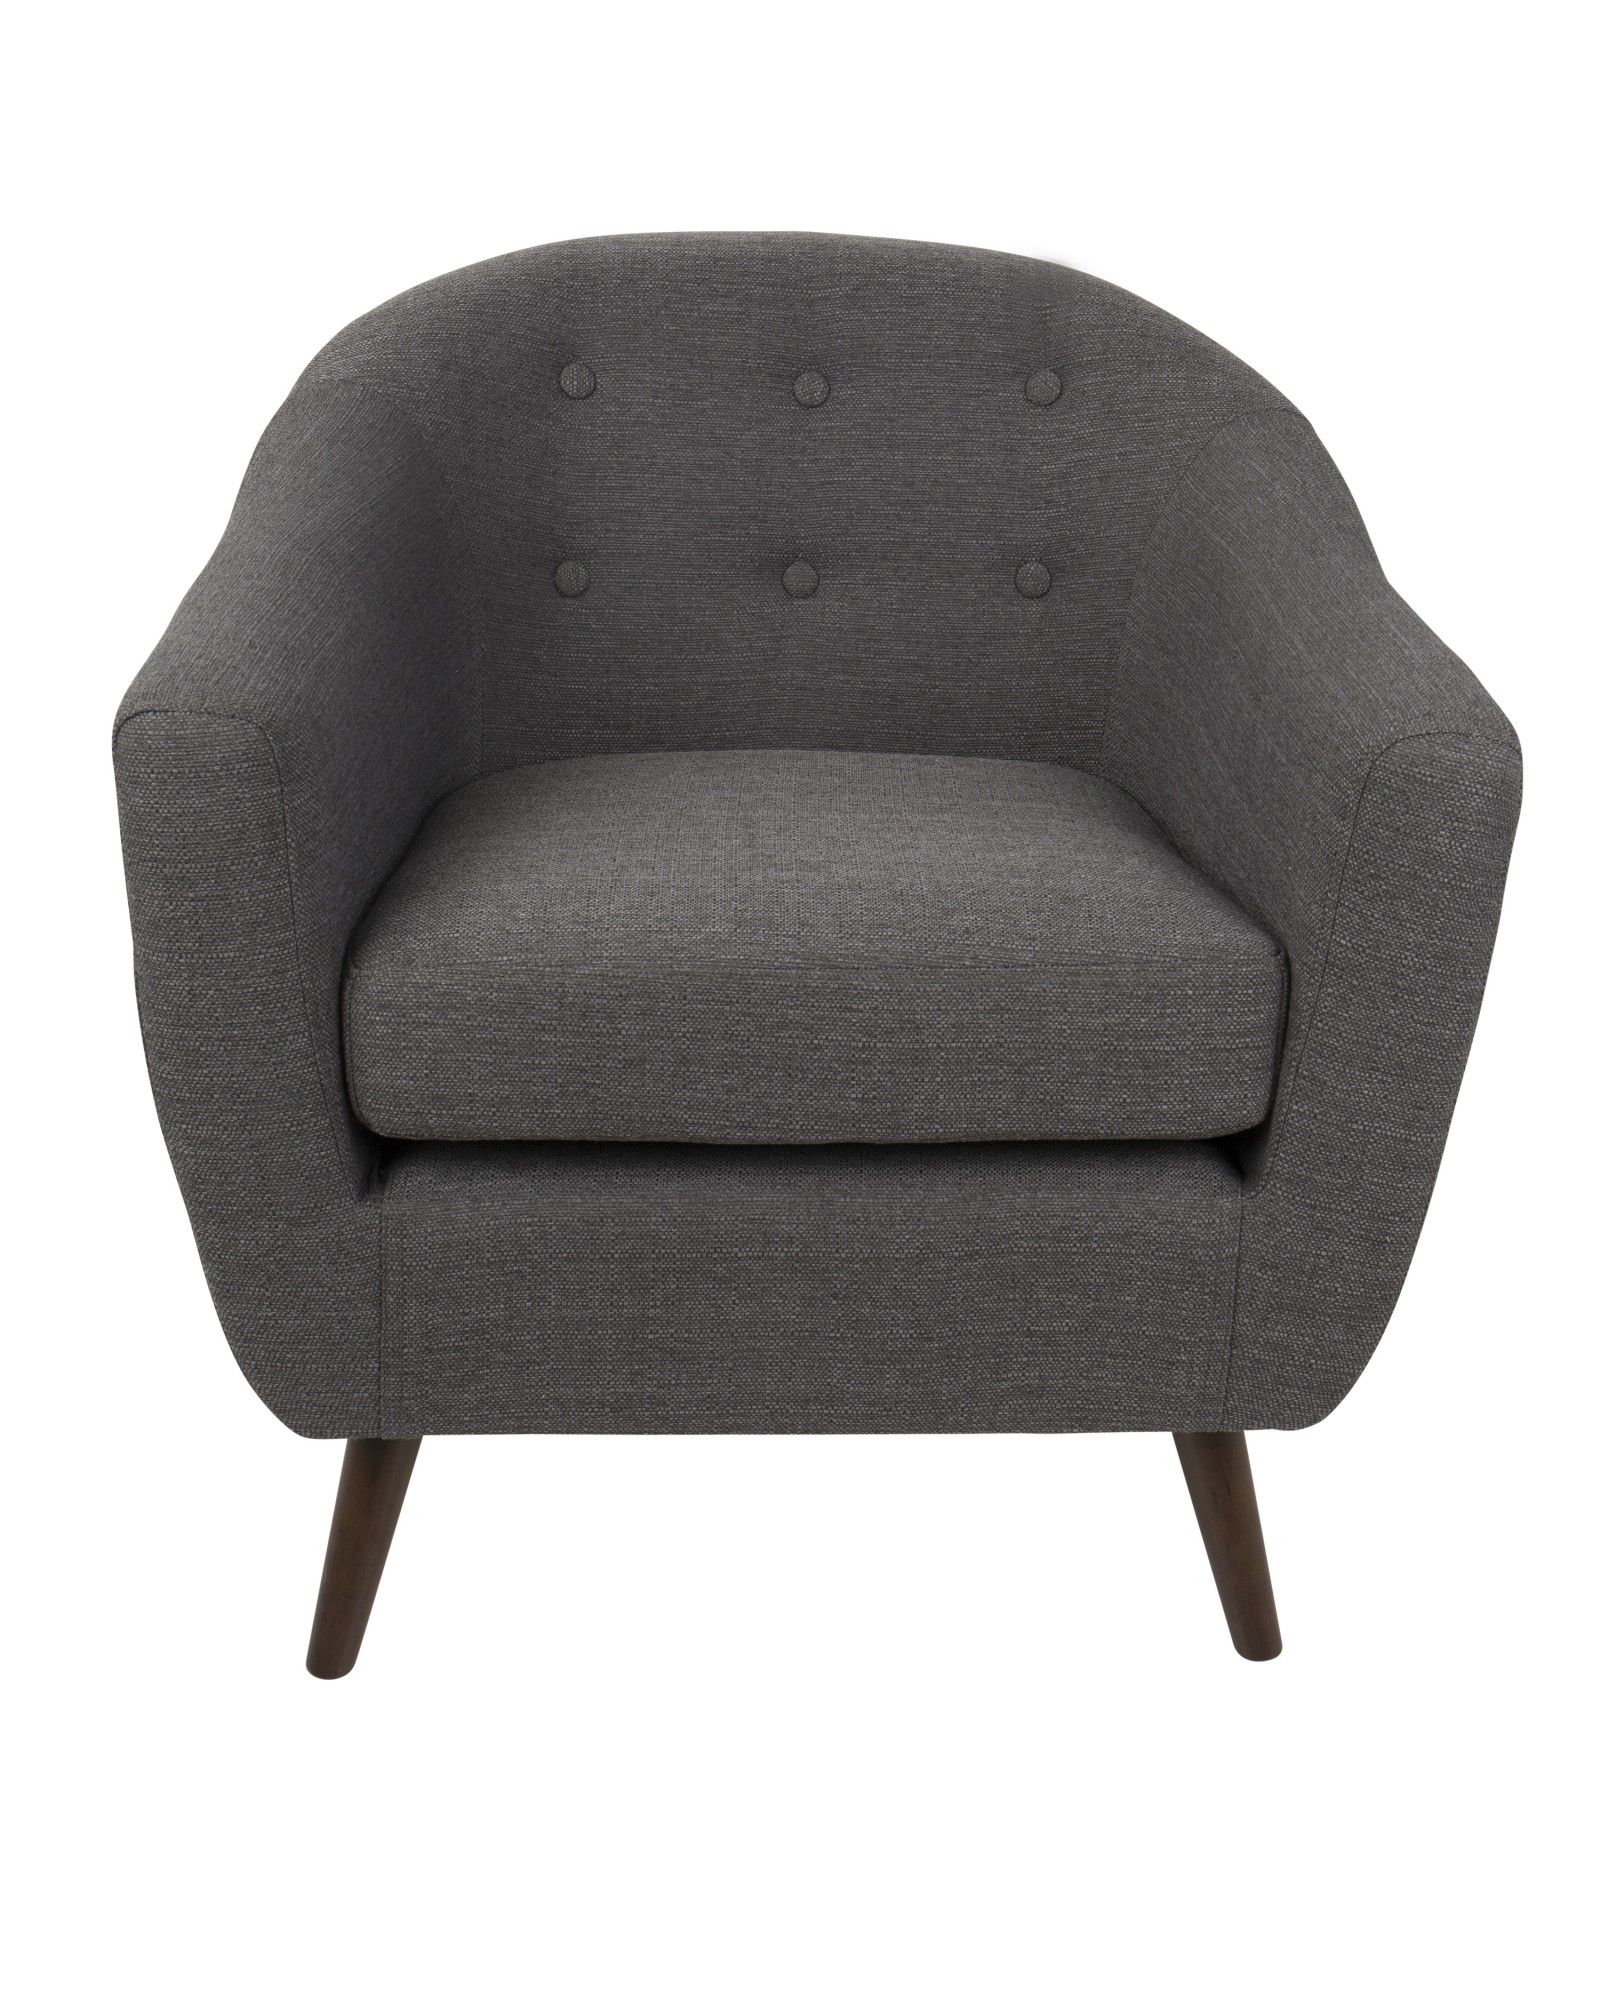 Rockwell Mid Century Modern Accent Chair in Grey